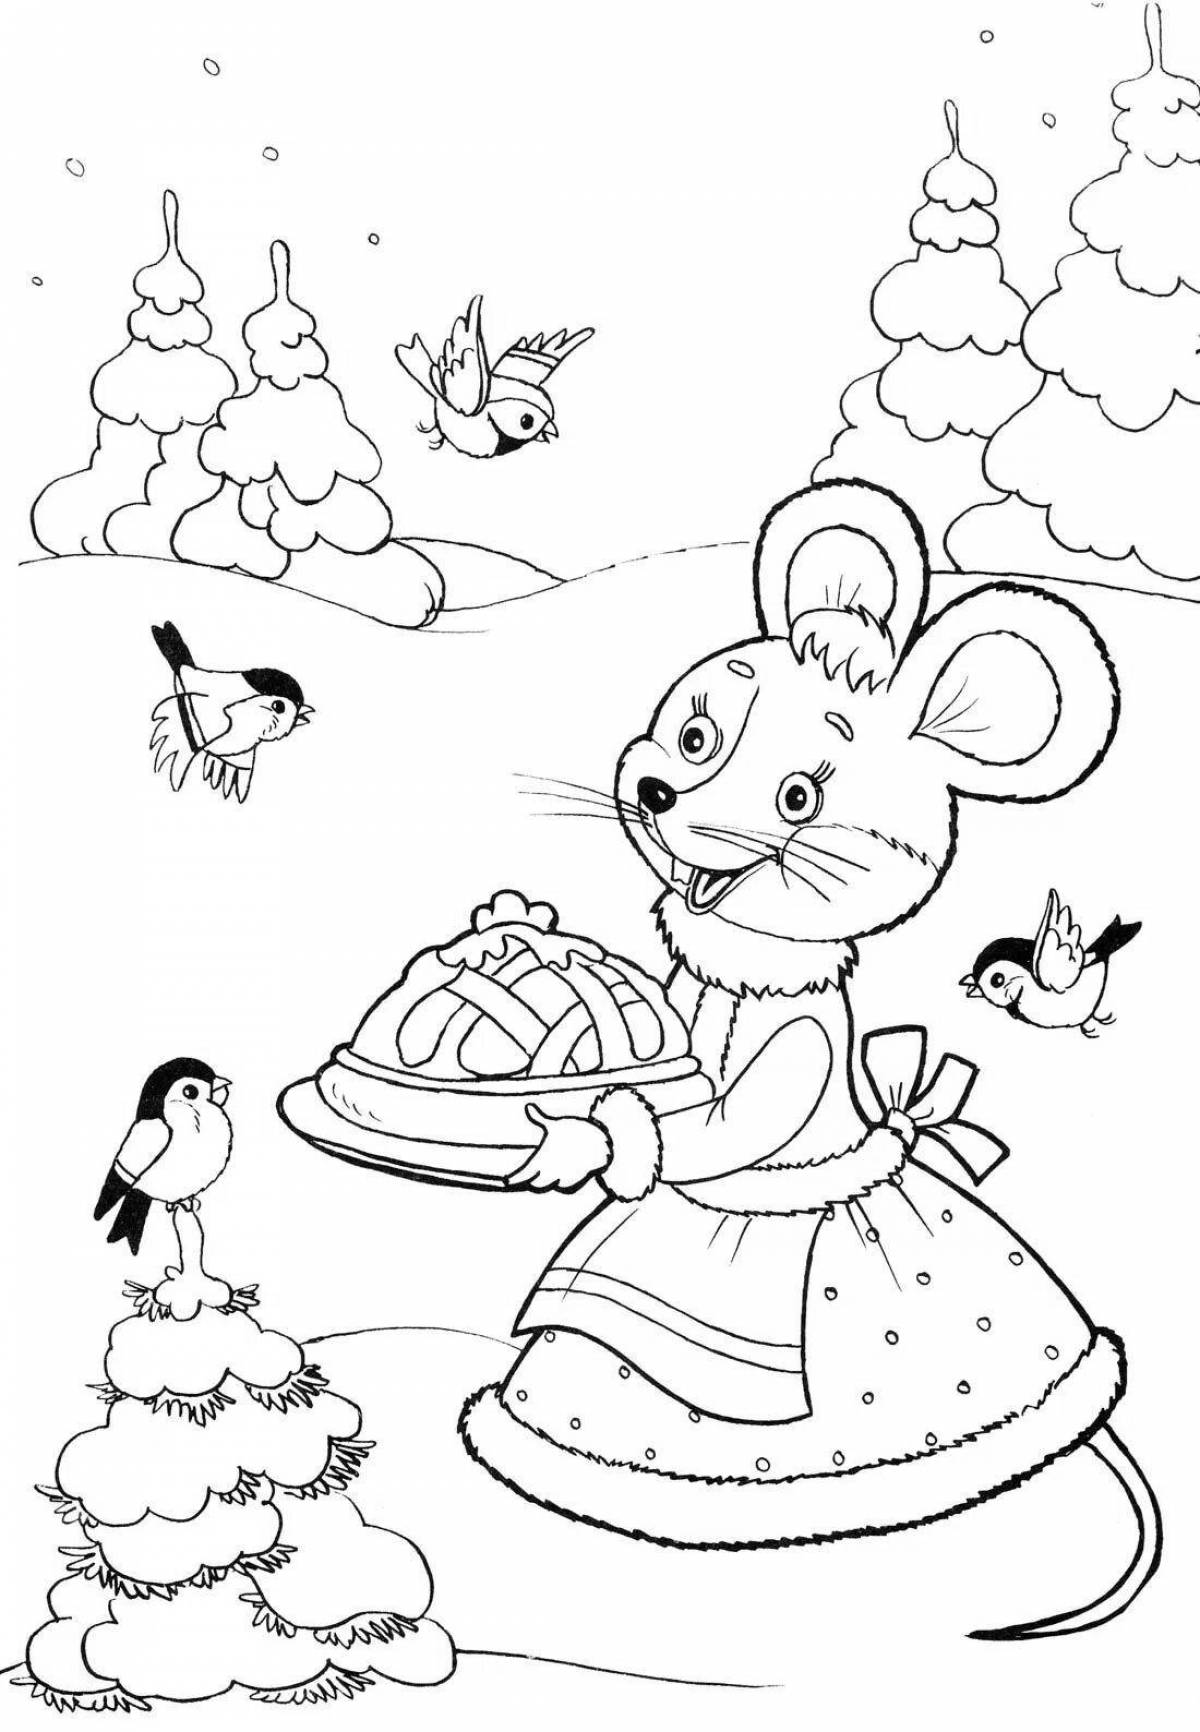 Funny mouse norushka coloring book